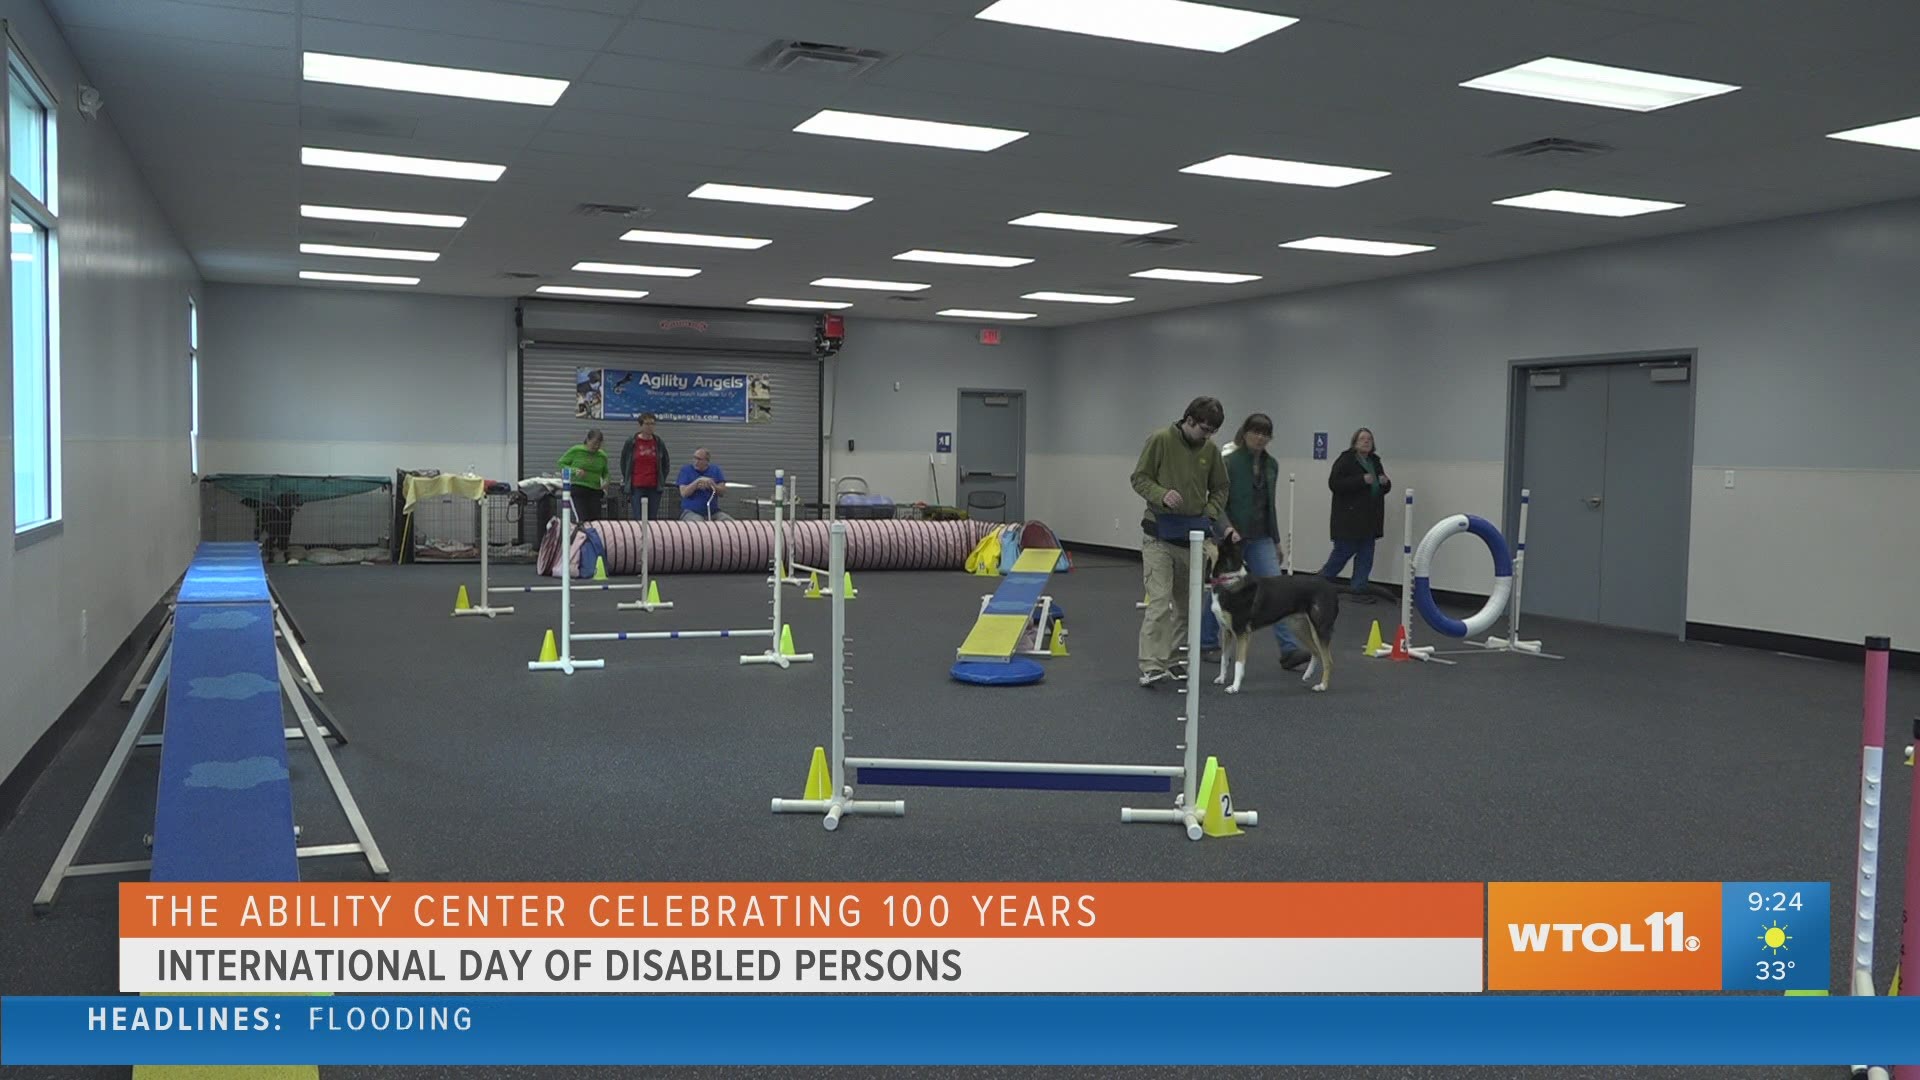 The Ability Center is celebrating 100 years of helping disabled persons in our community become able to do anything!